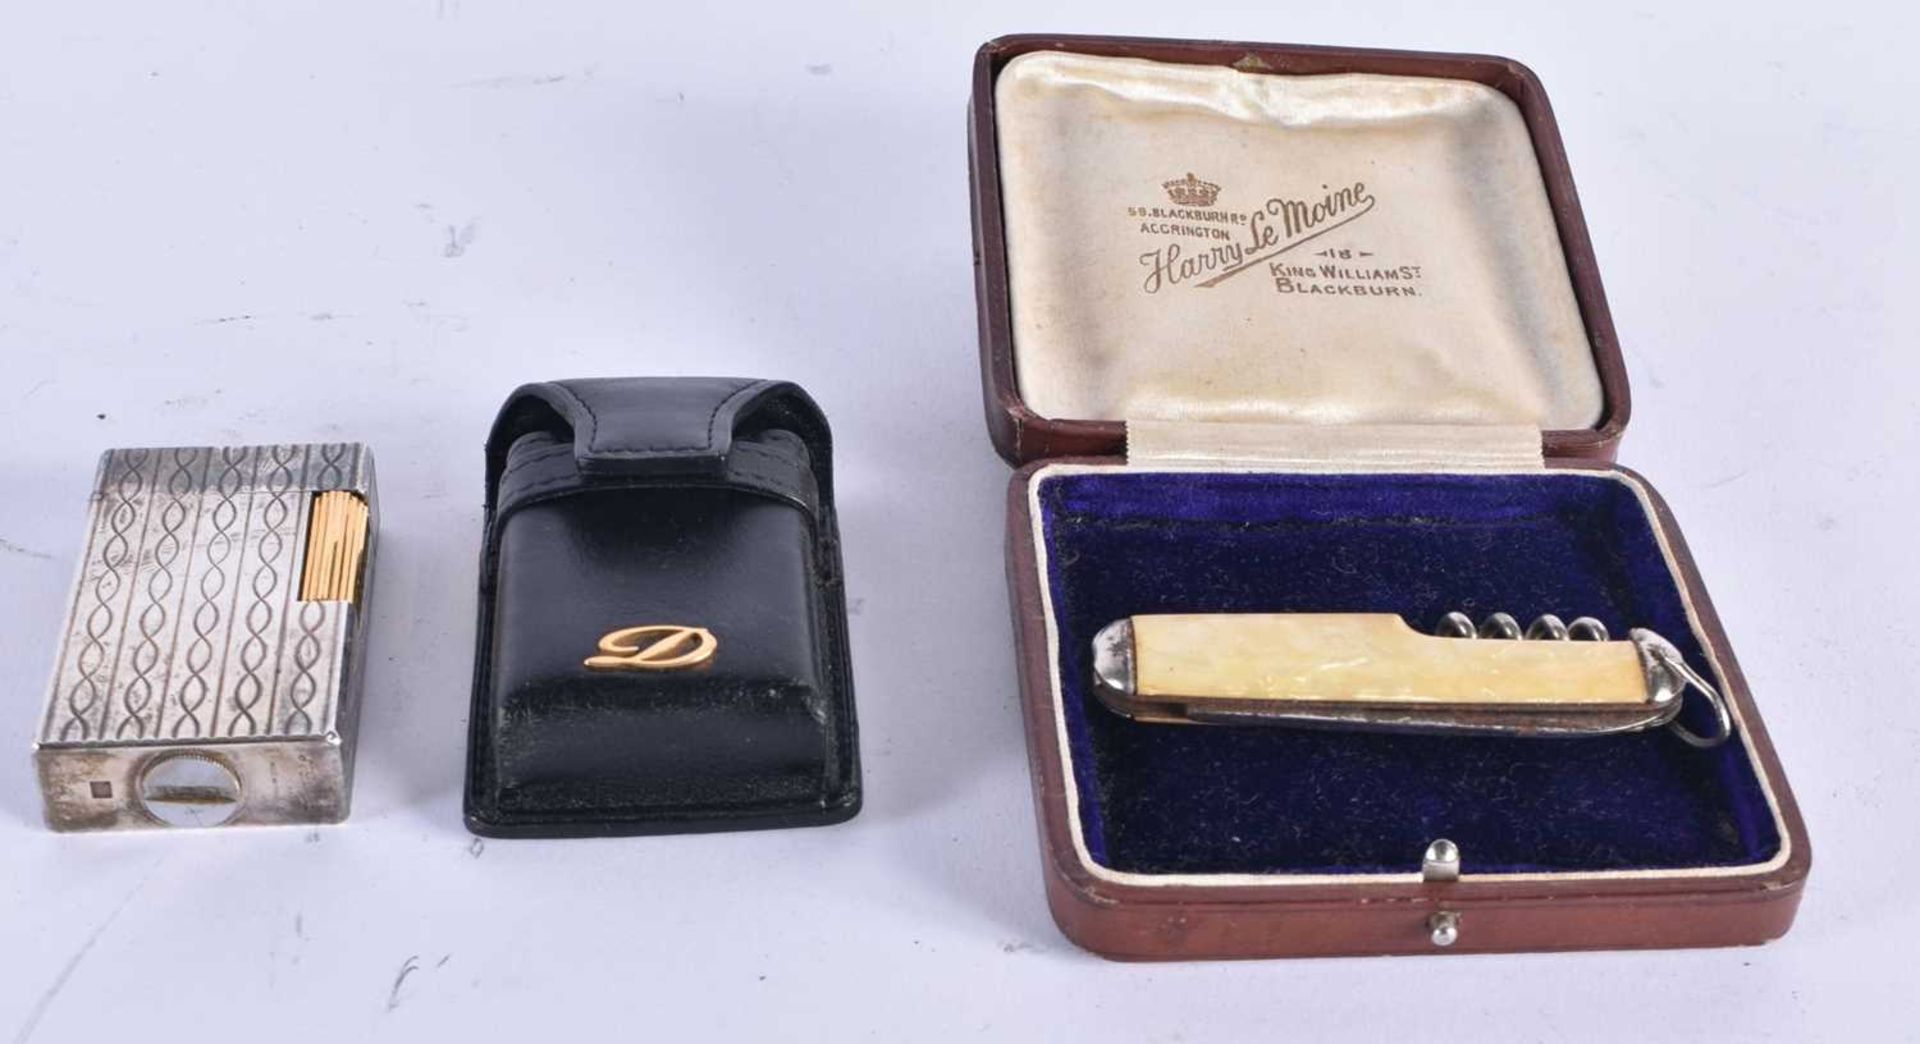 AN ANTIQUE HARRY LE MOINE COMBINATION KNIFE and a ST Dupont silver plated lighter. Largest 14 cm